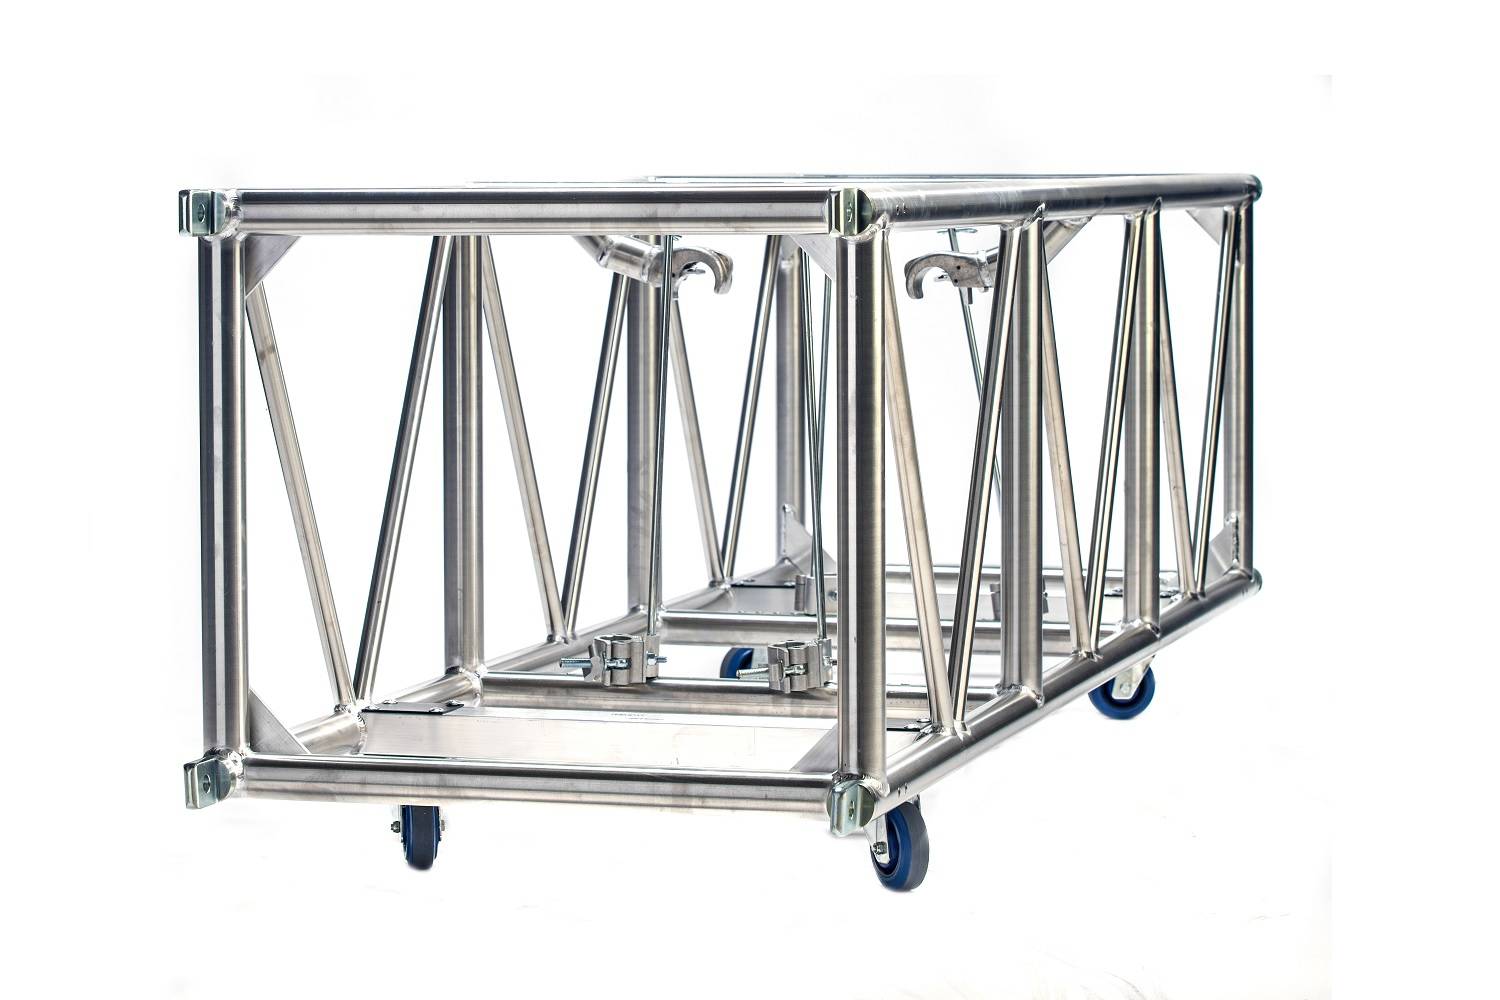 Double hung pre-rig truss 26 x 30 spigoted